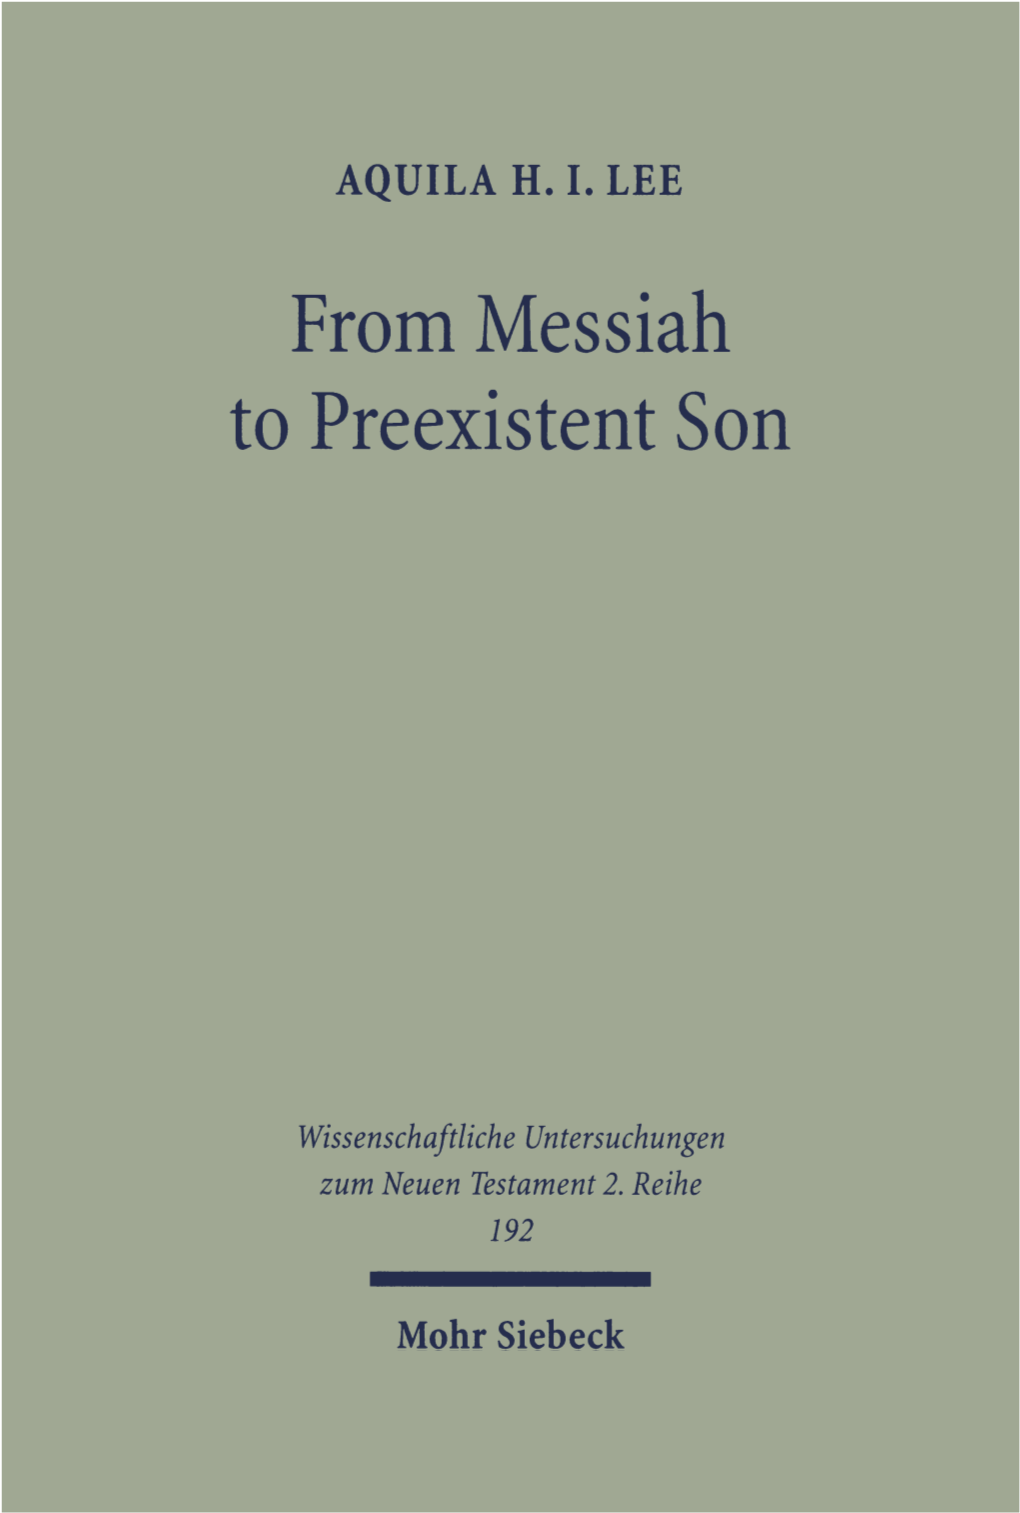 From Messiah to Préexistent Son